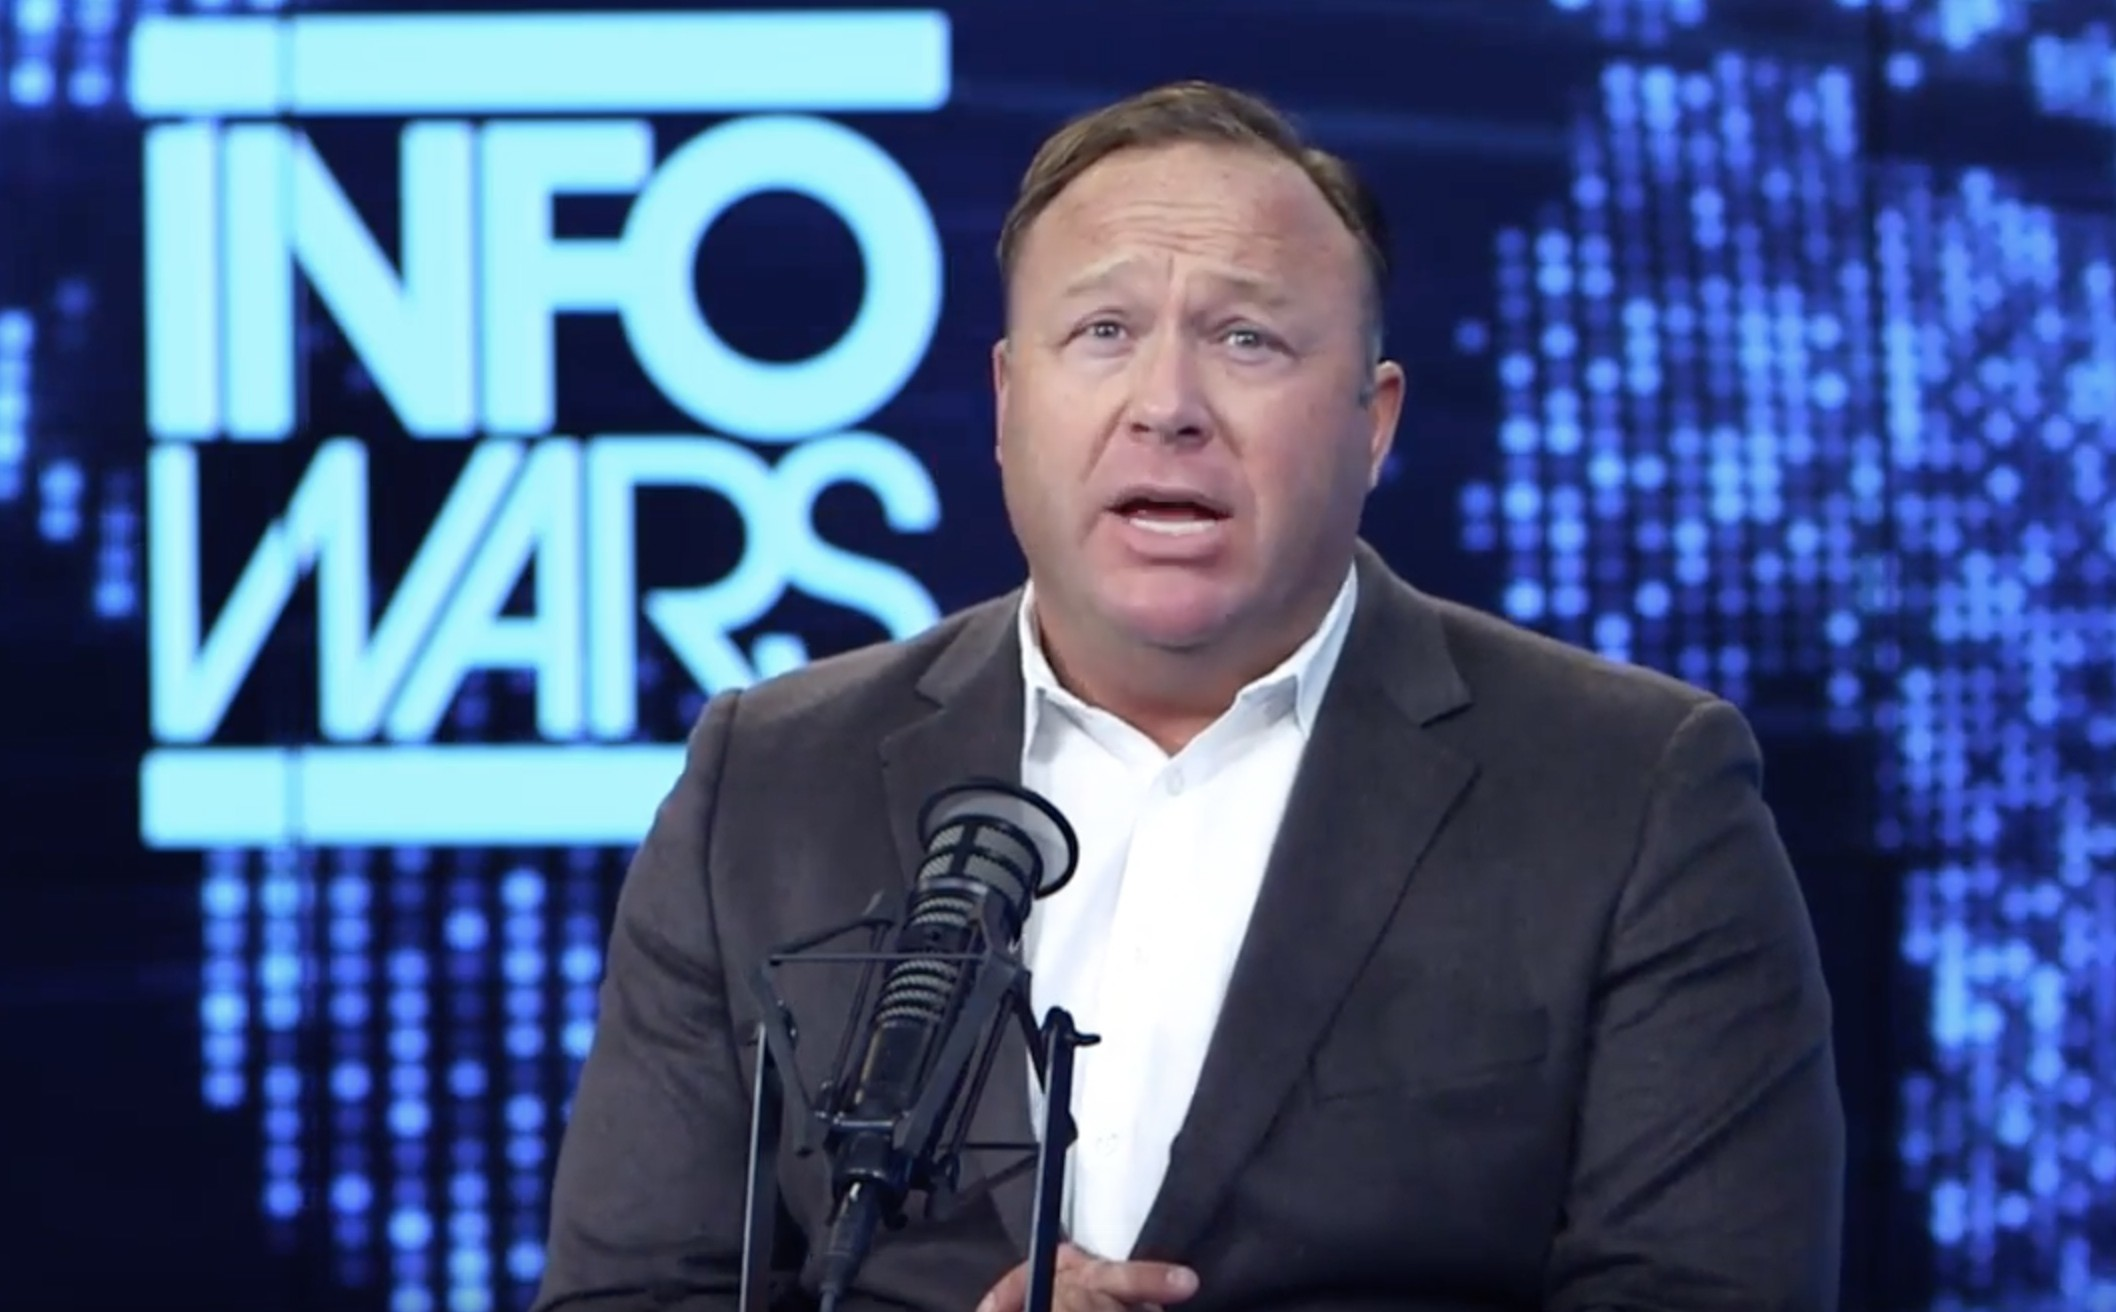 alex jones the frogs are gay